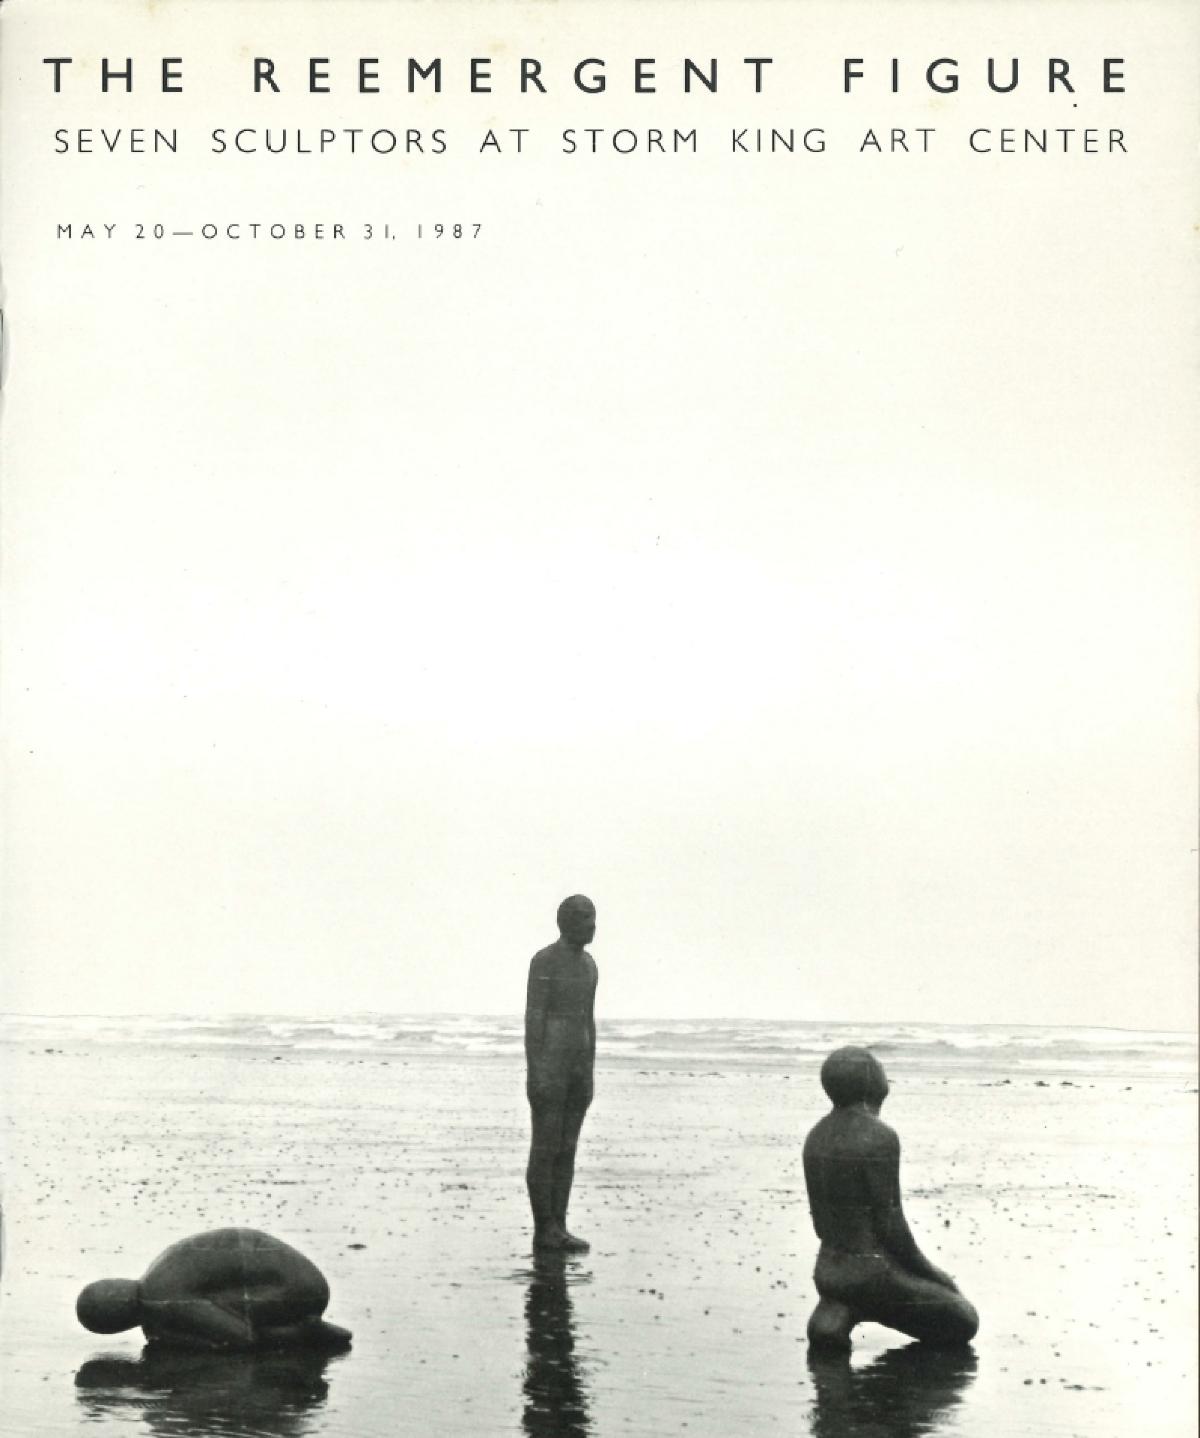 The Reemergent Figure: Seven Sculptors at Storm King Art Center, May 20 – October 31, 1987, exhibition catalogue, cover